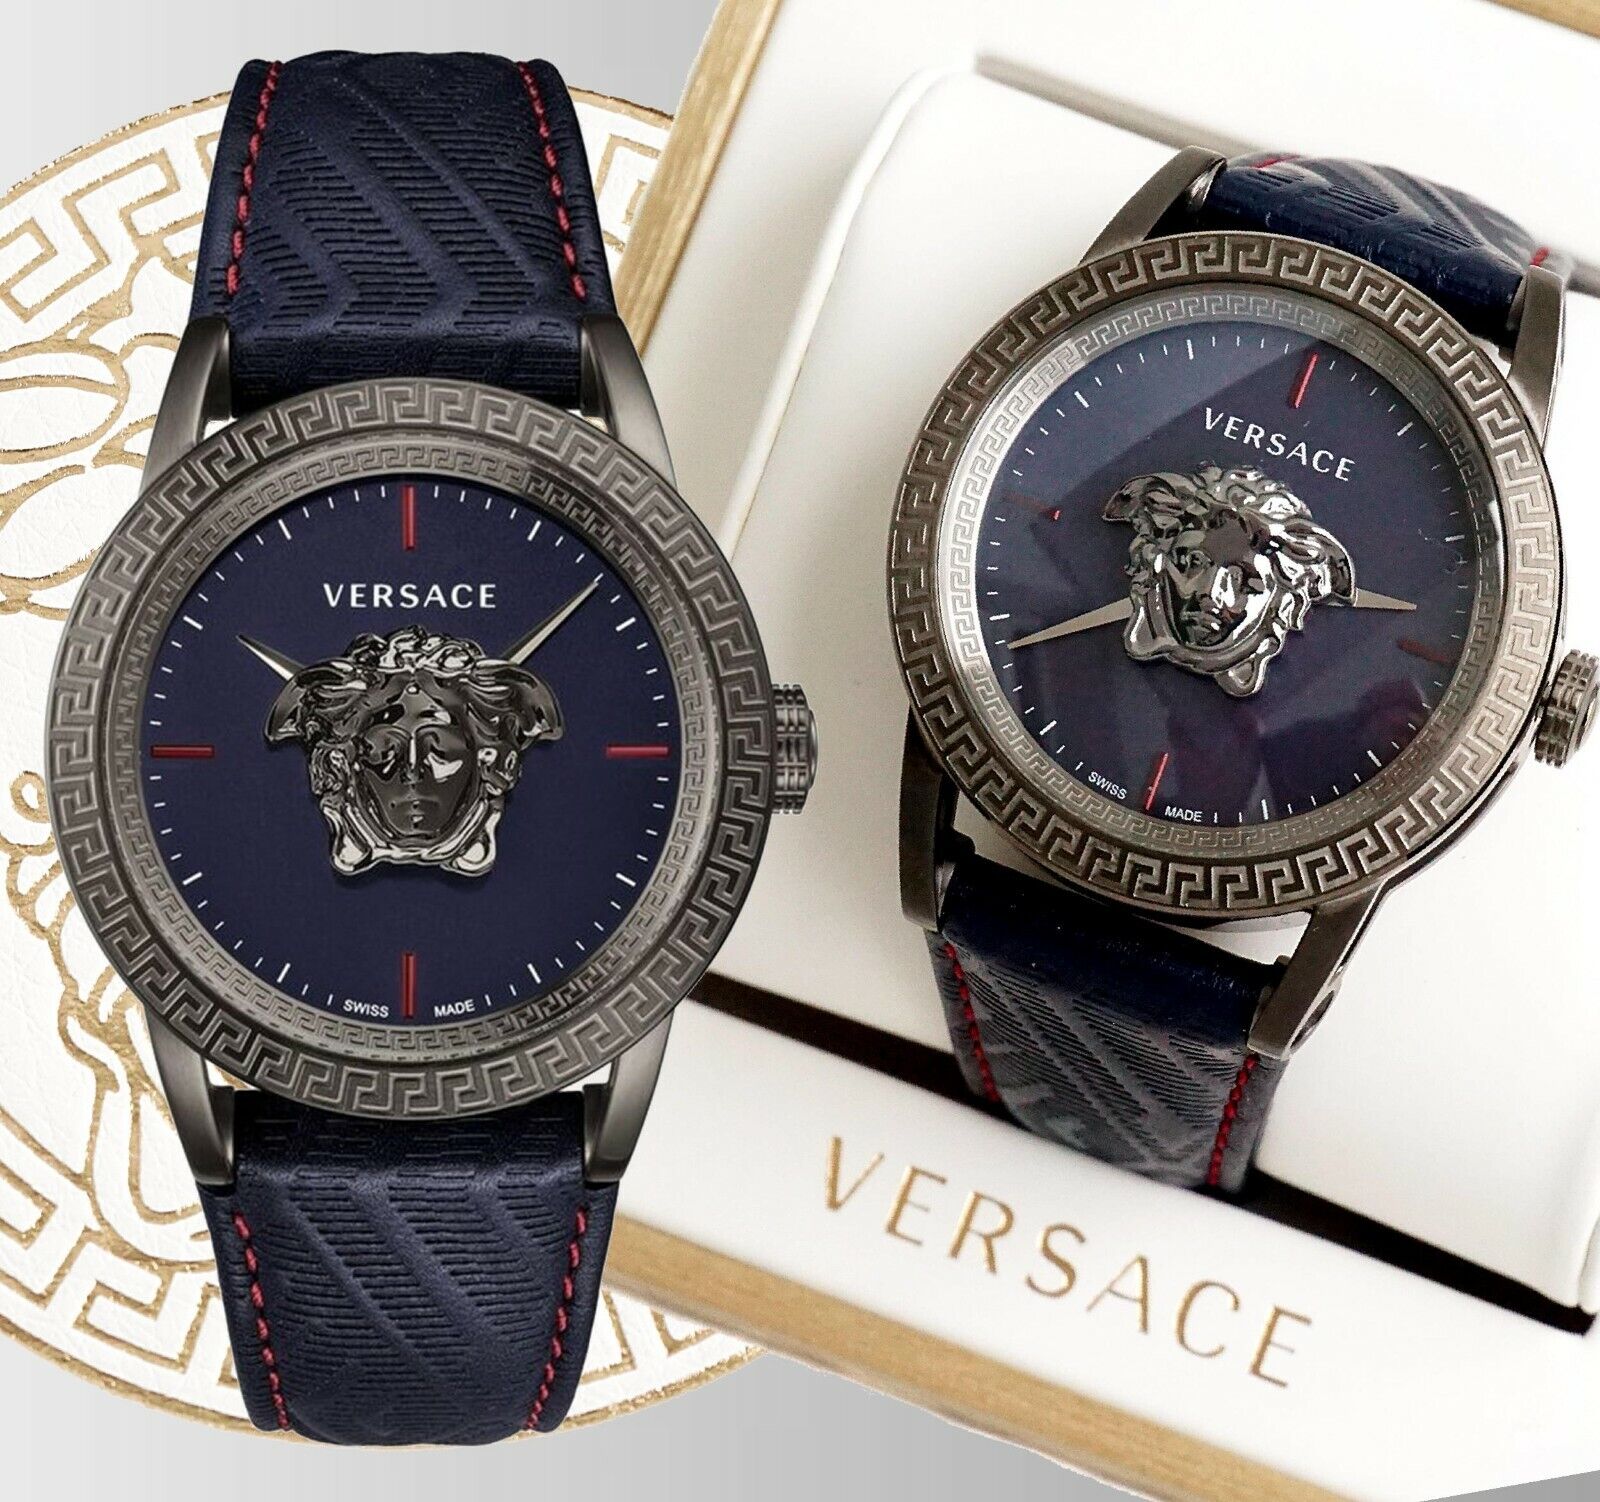 Versace Palazzo Empire Black Dial Black Leather Strap Watch for Men - VERD00218